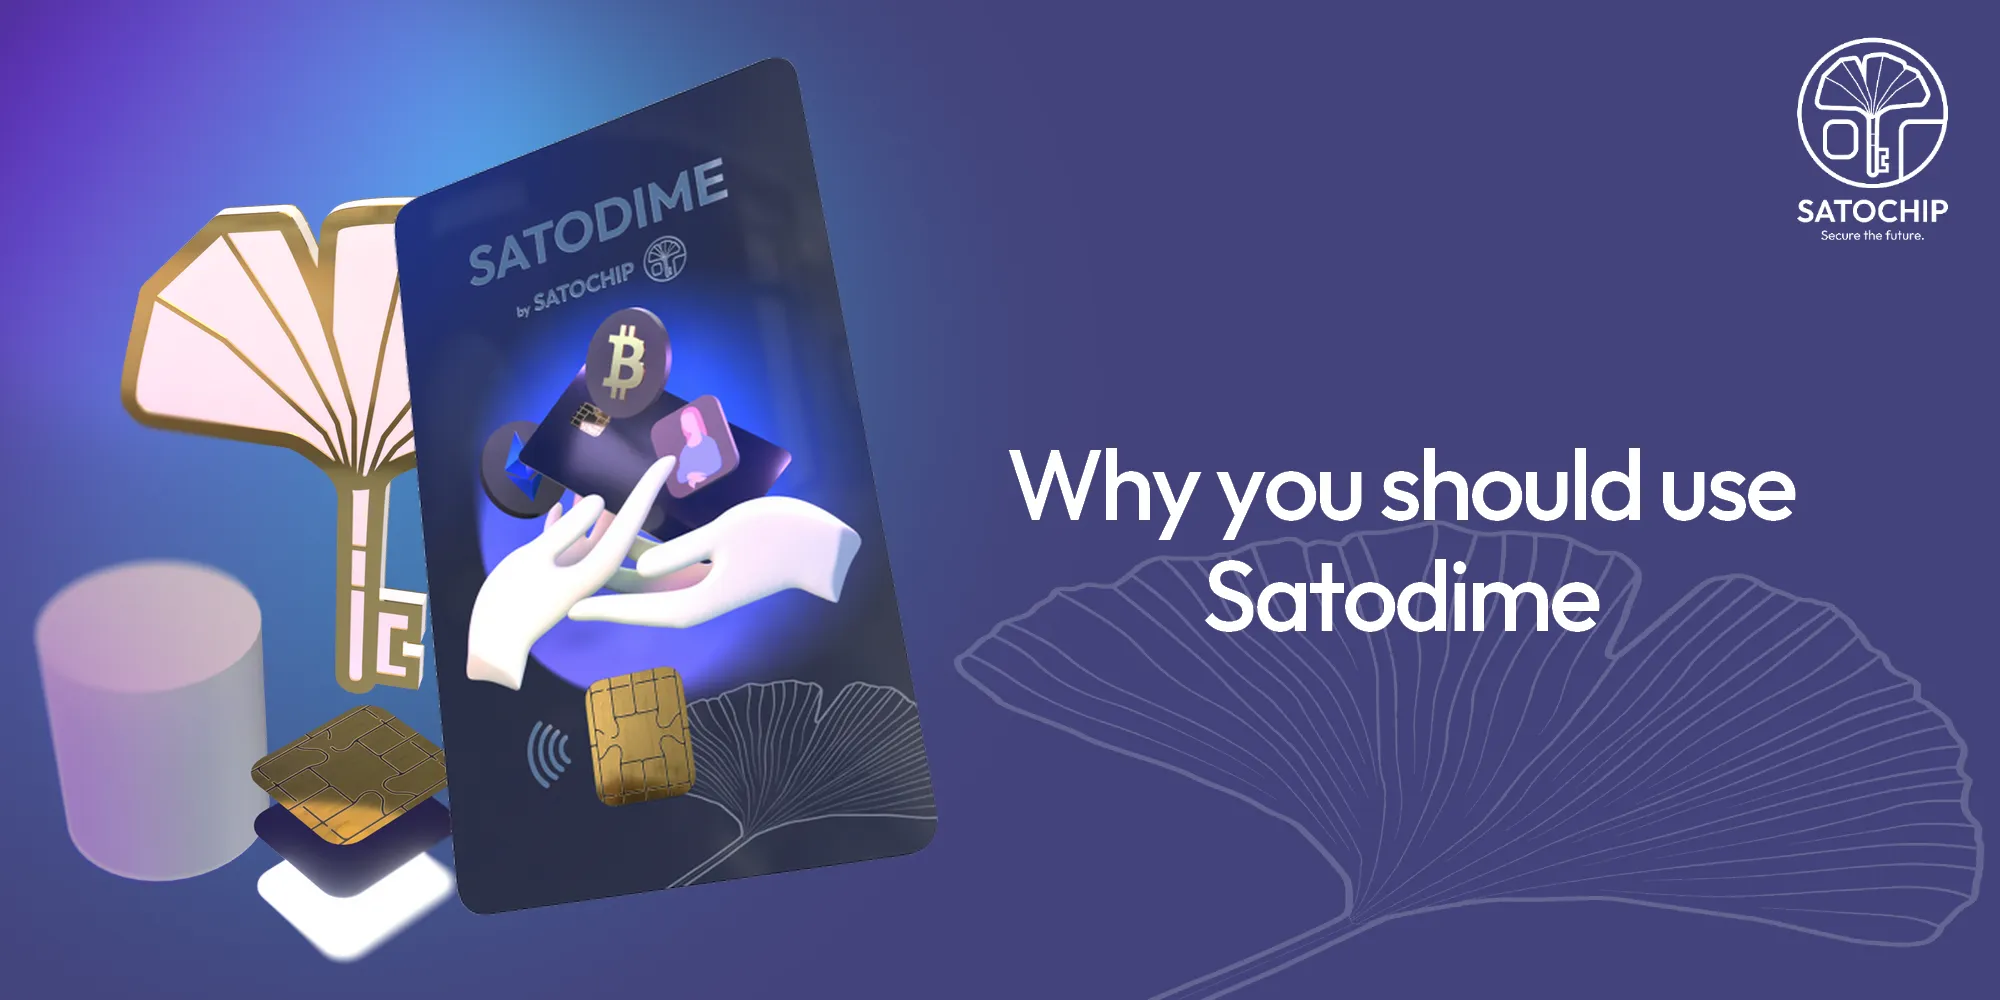 Why you should use Satodime, the bearer crypto card.